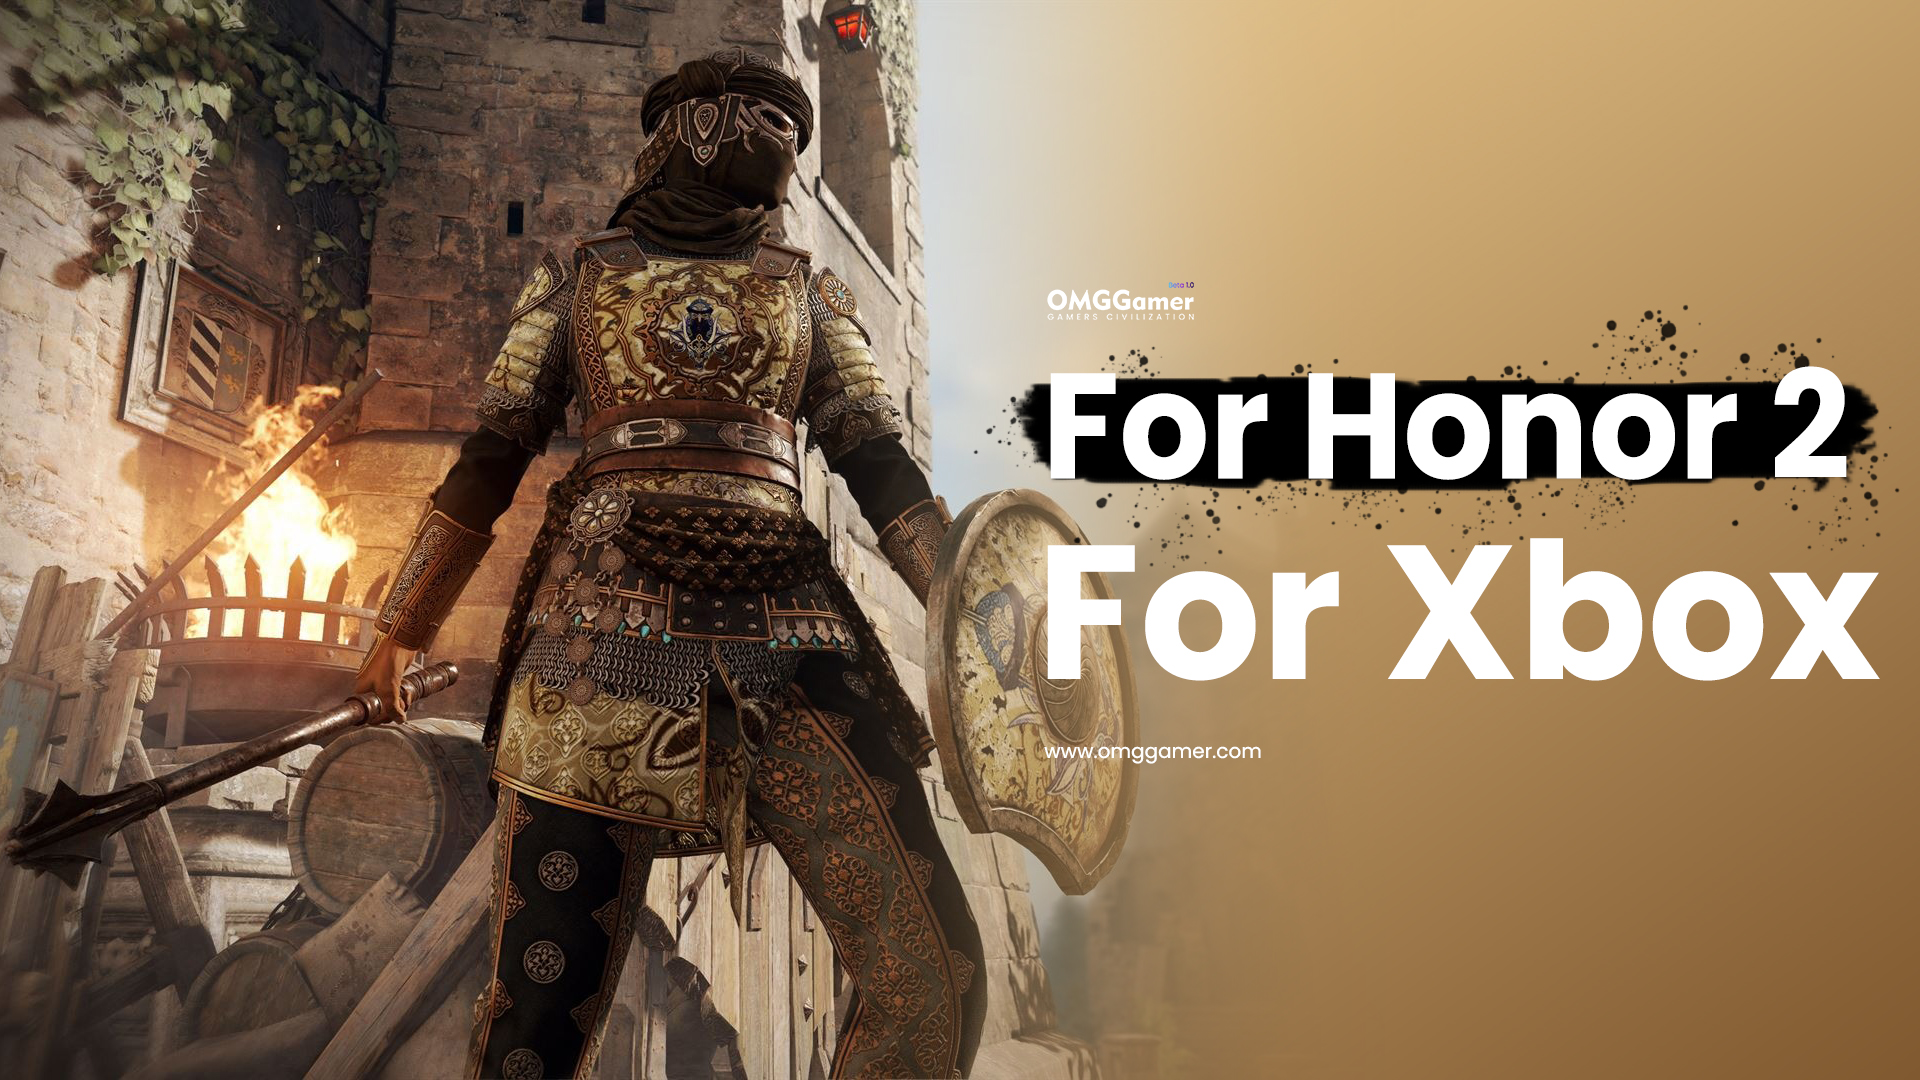 For Honor 2 for Xbox